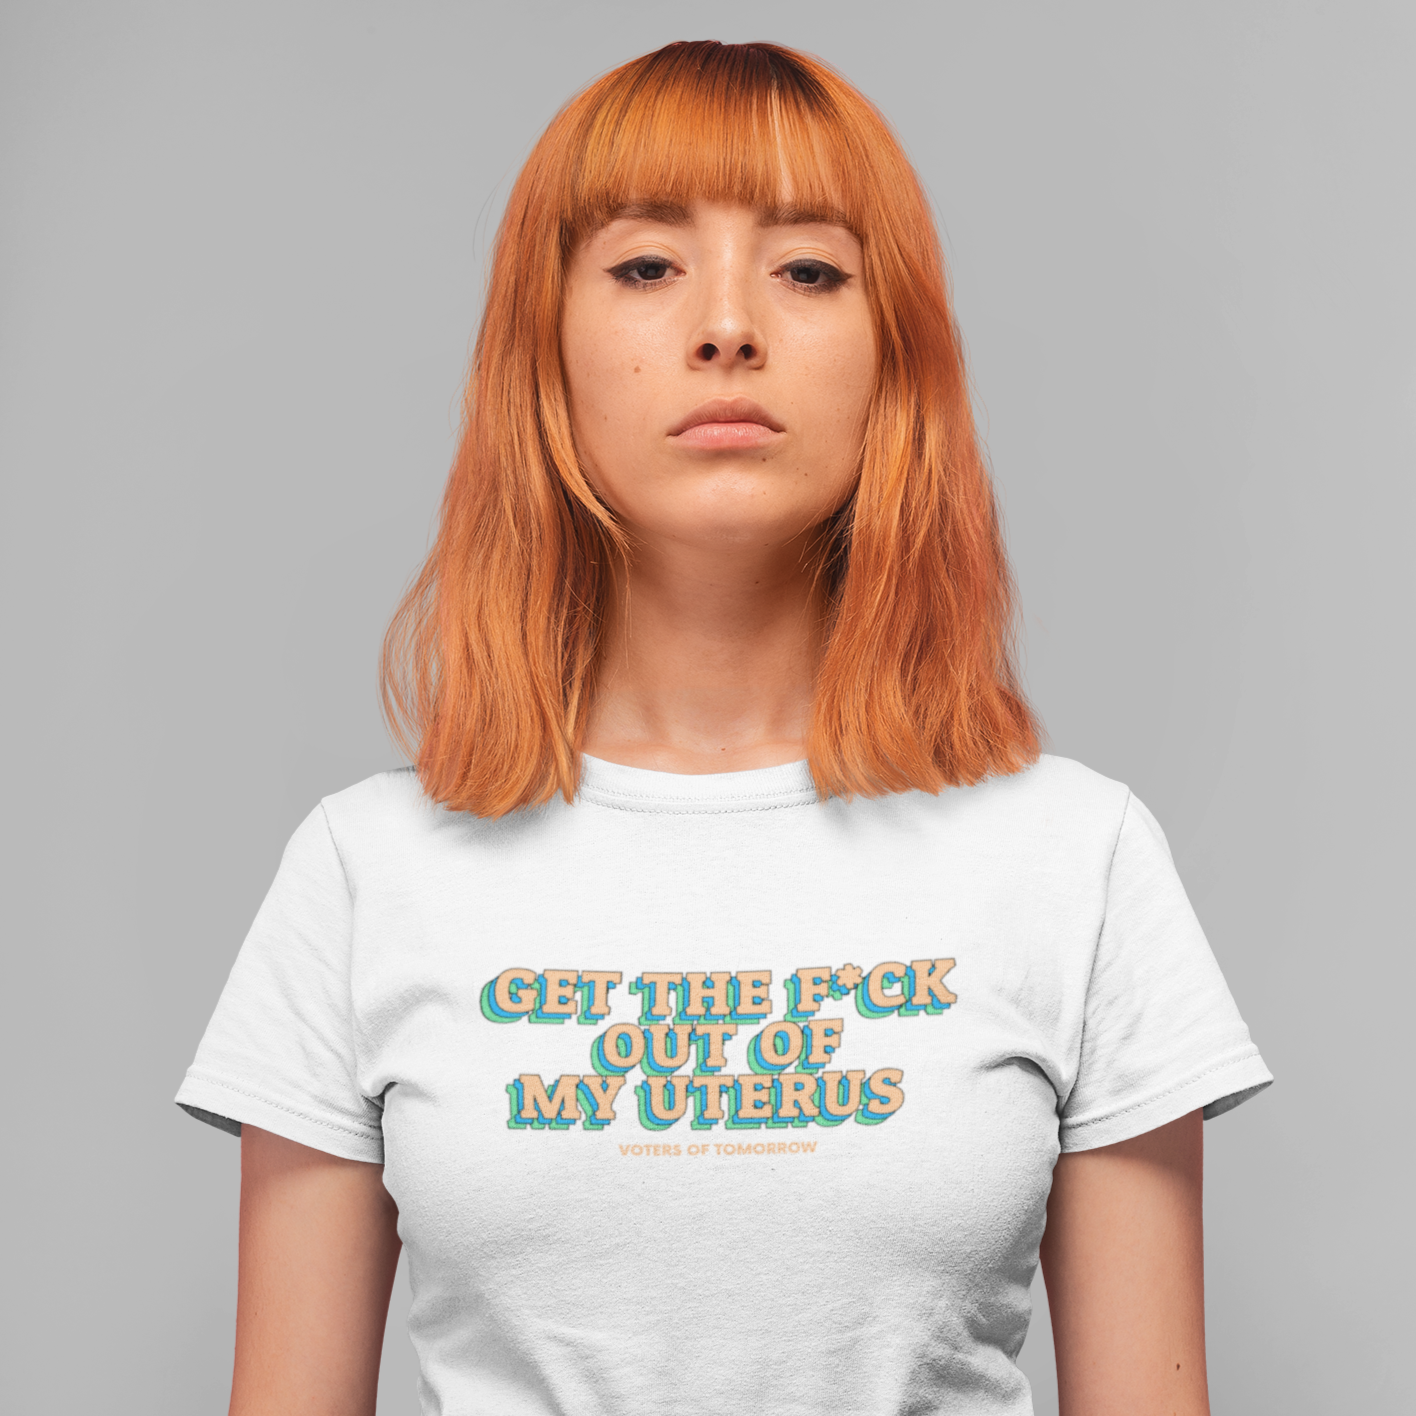 Get the F*ck Out of My Uterus Tee